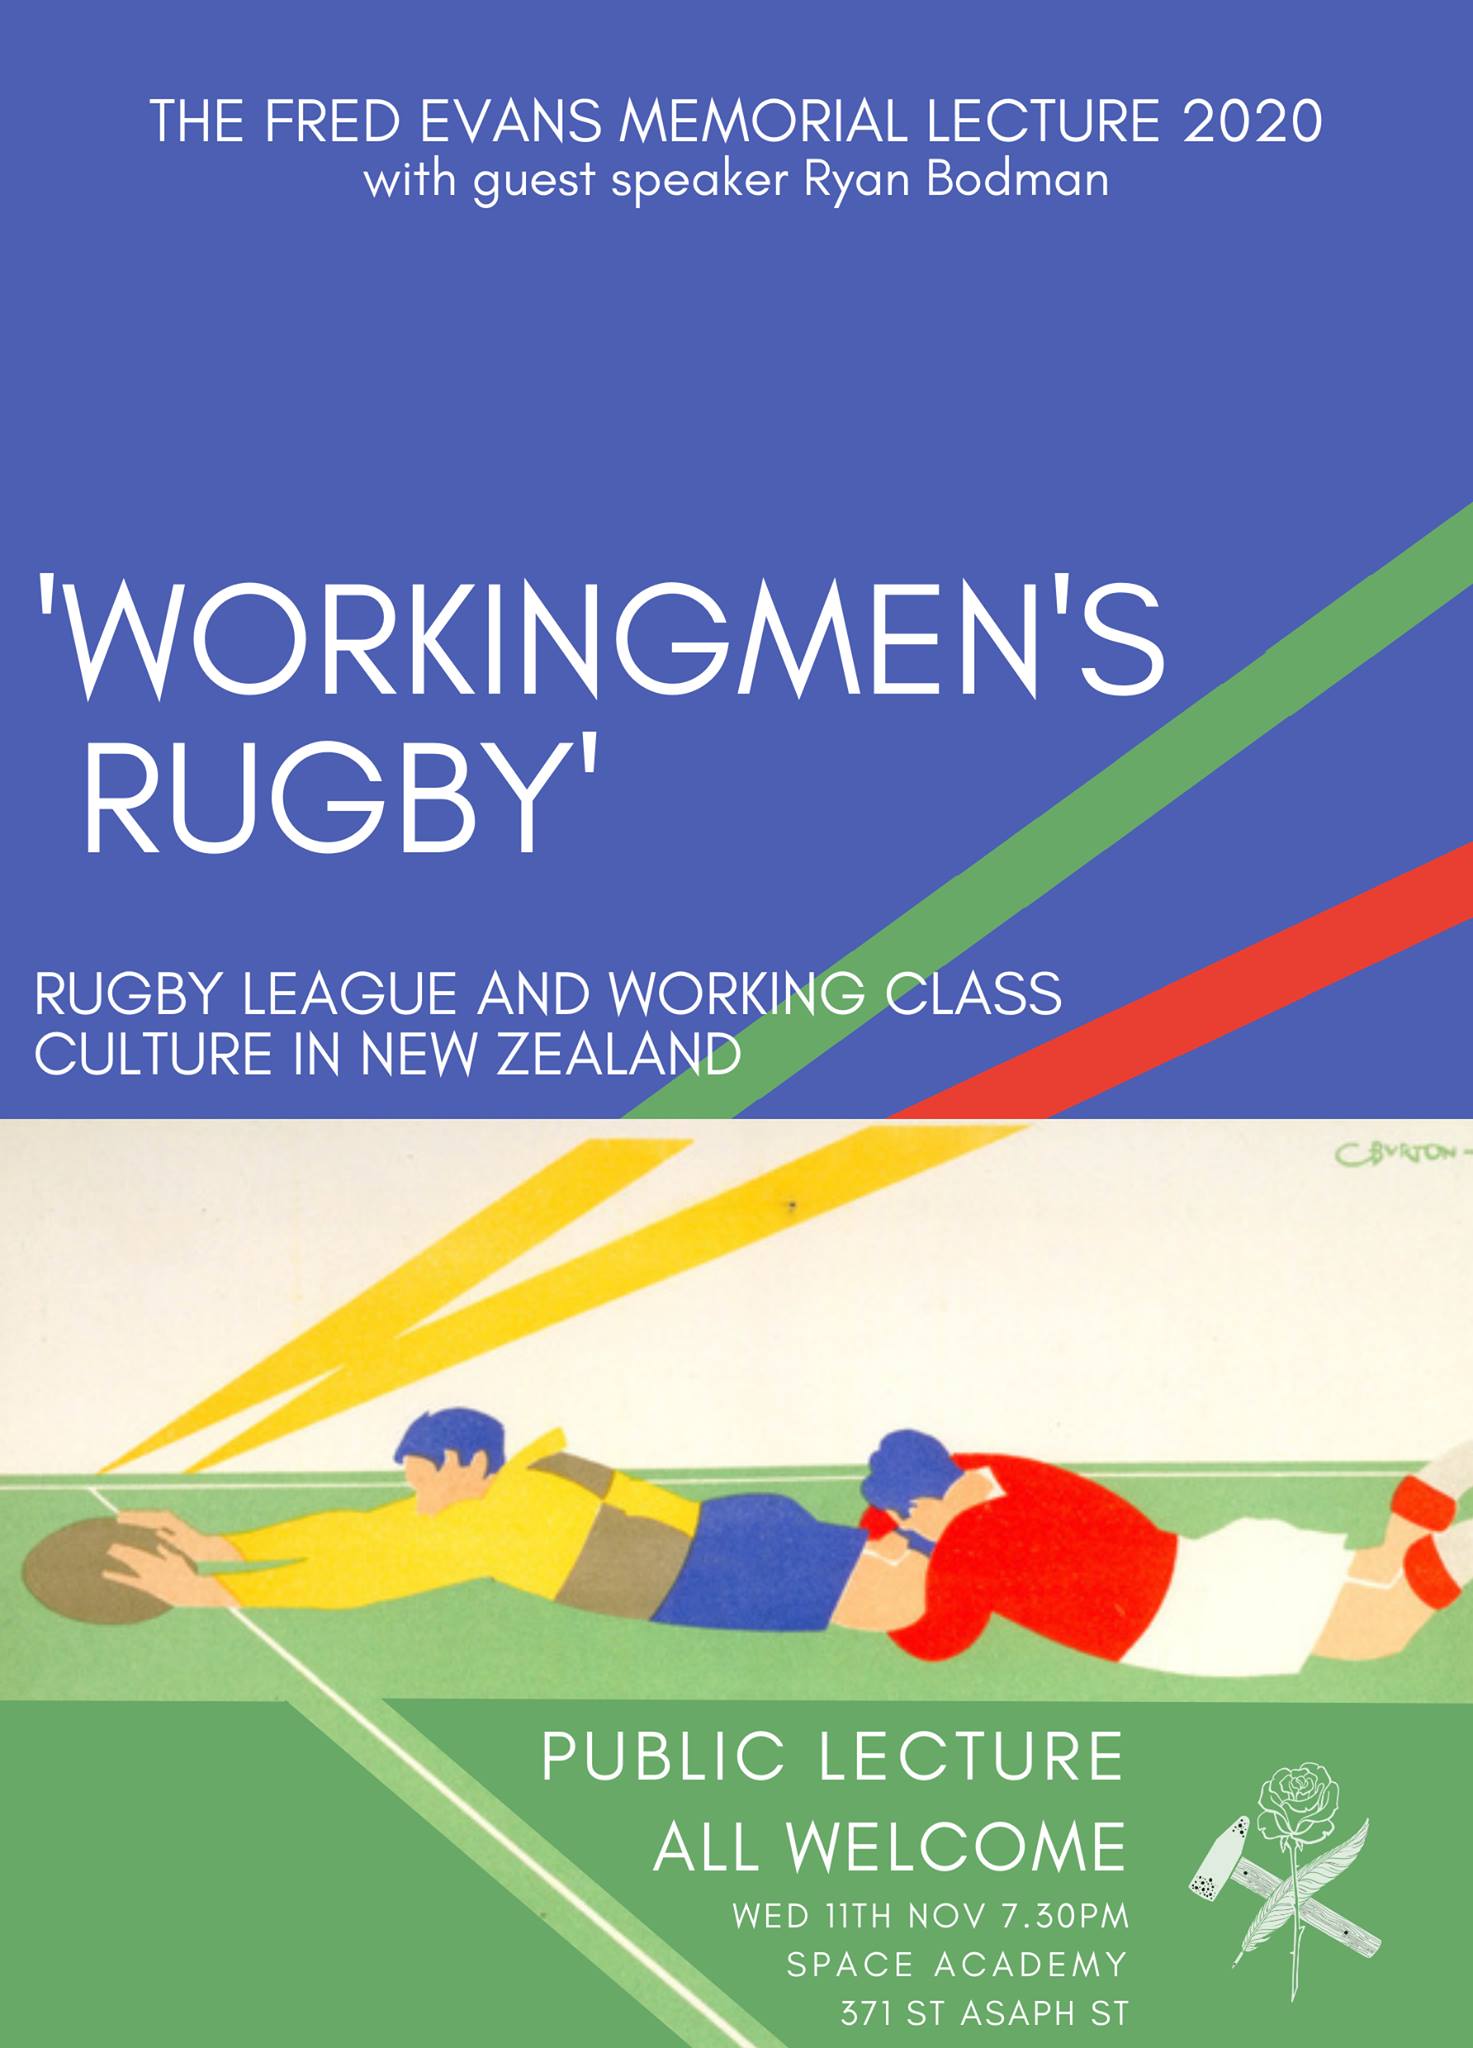 The Fred Evans Memorial Lecture 2020: “Workingmen’s Rugby”